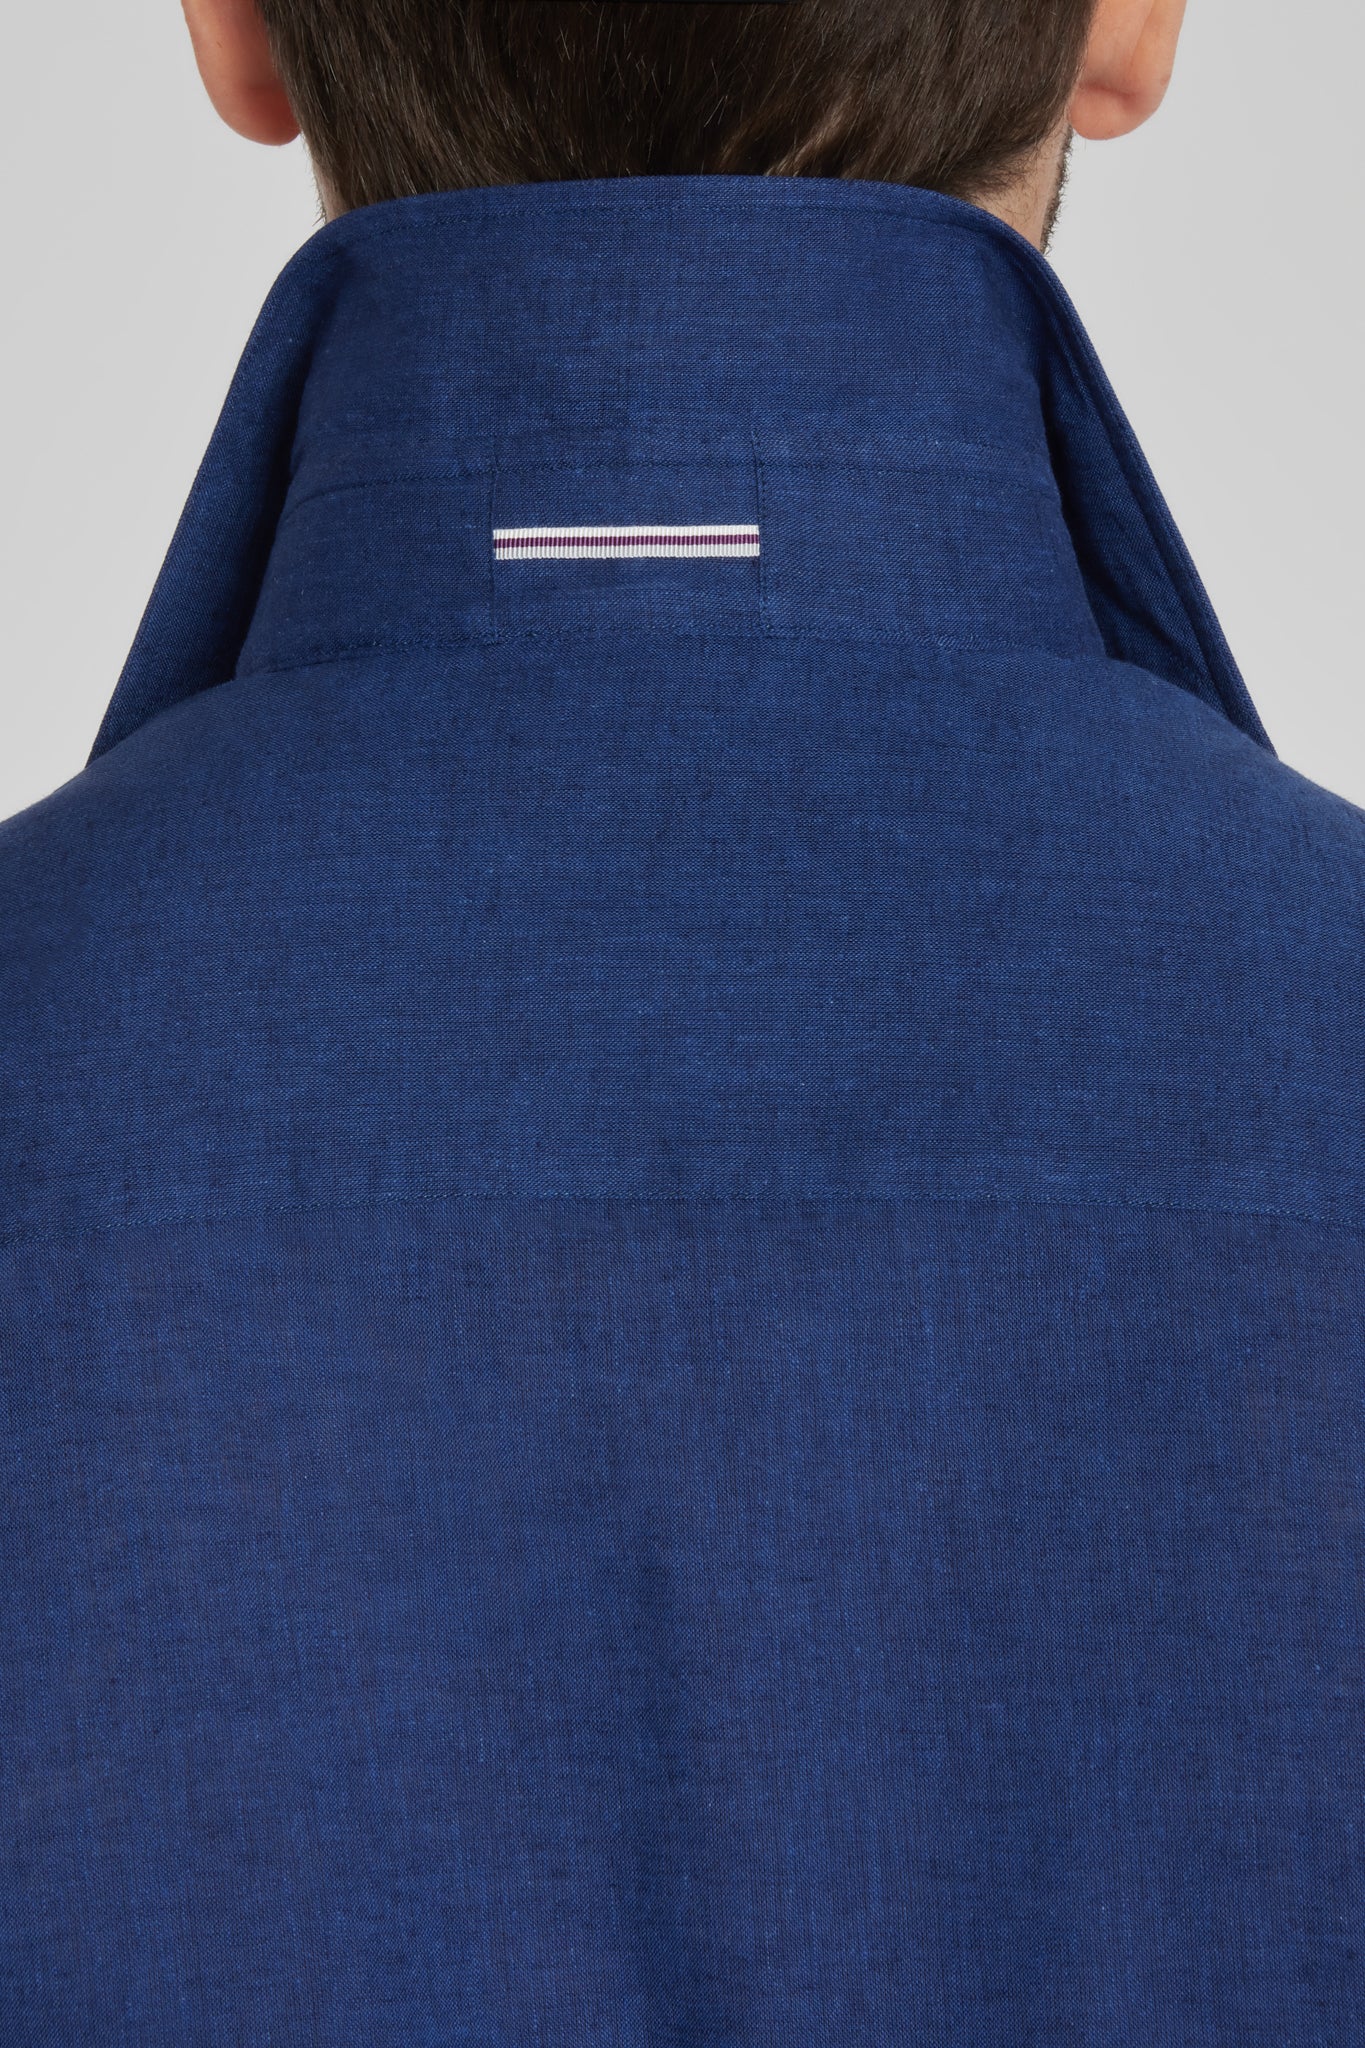 Alt view 3 Linen and Cotton Shirt in Navy